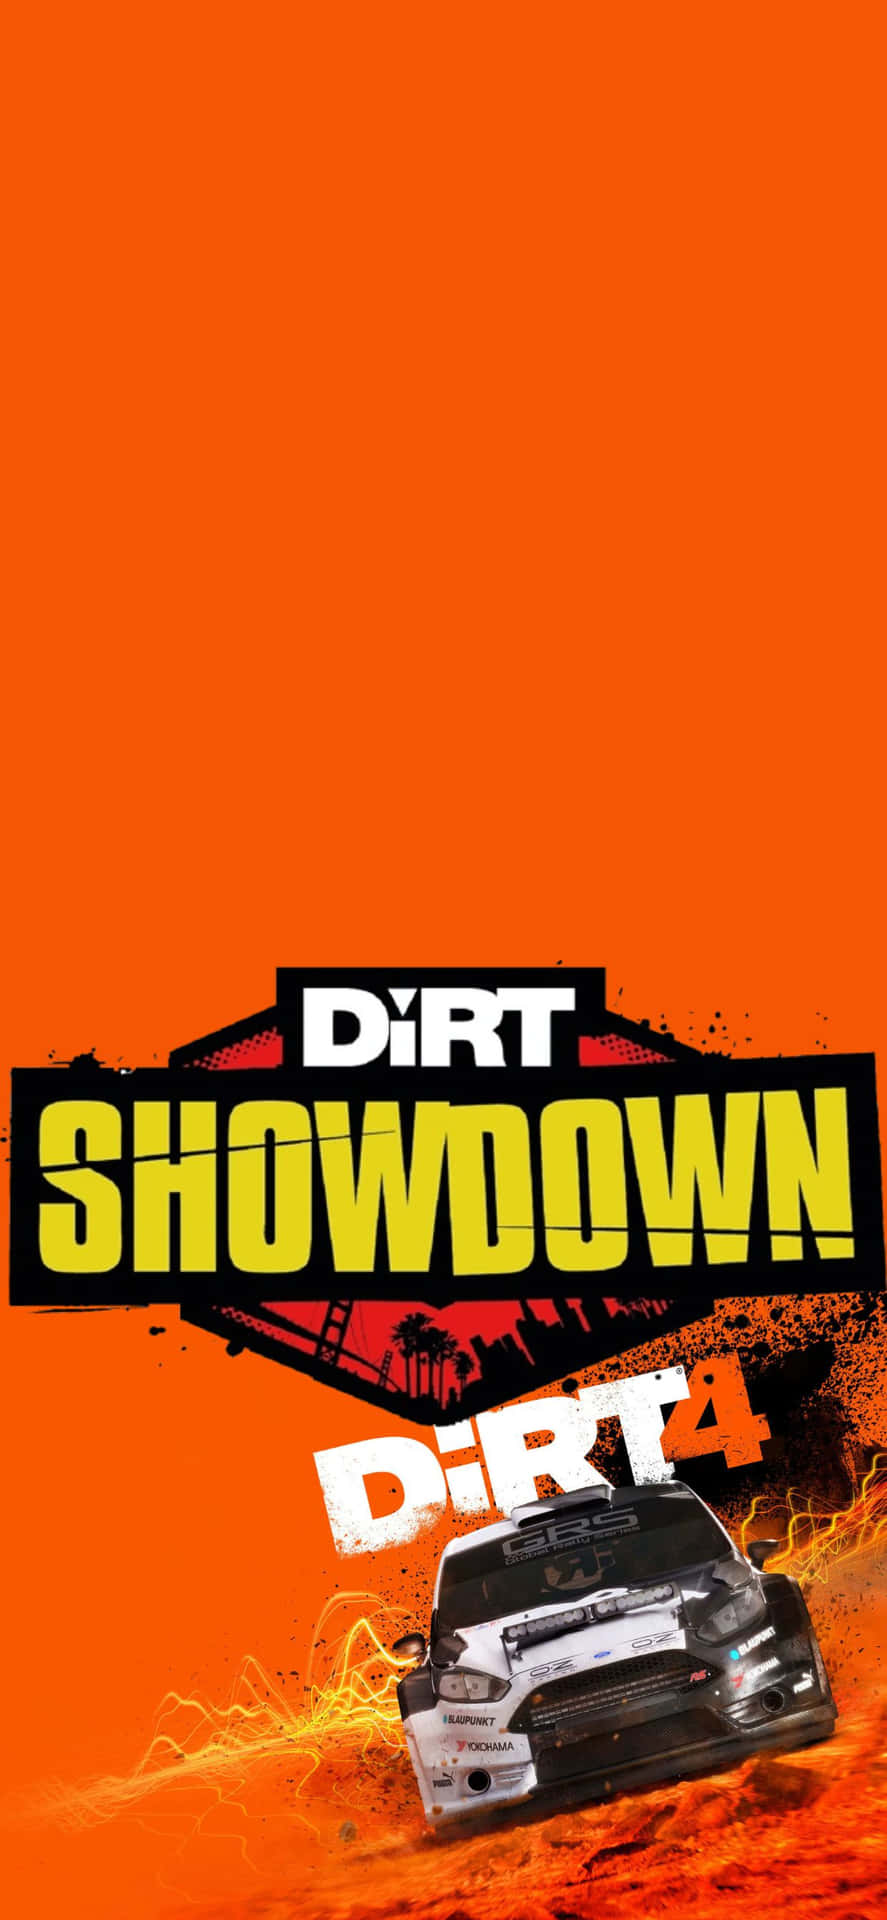 Grab the wheel and drive your way to victory in the Dirt Showdown.